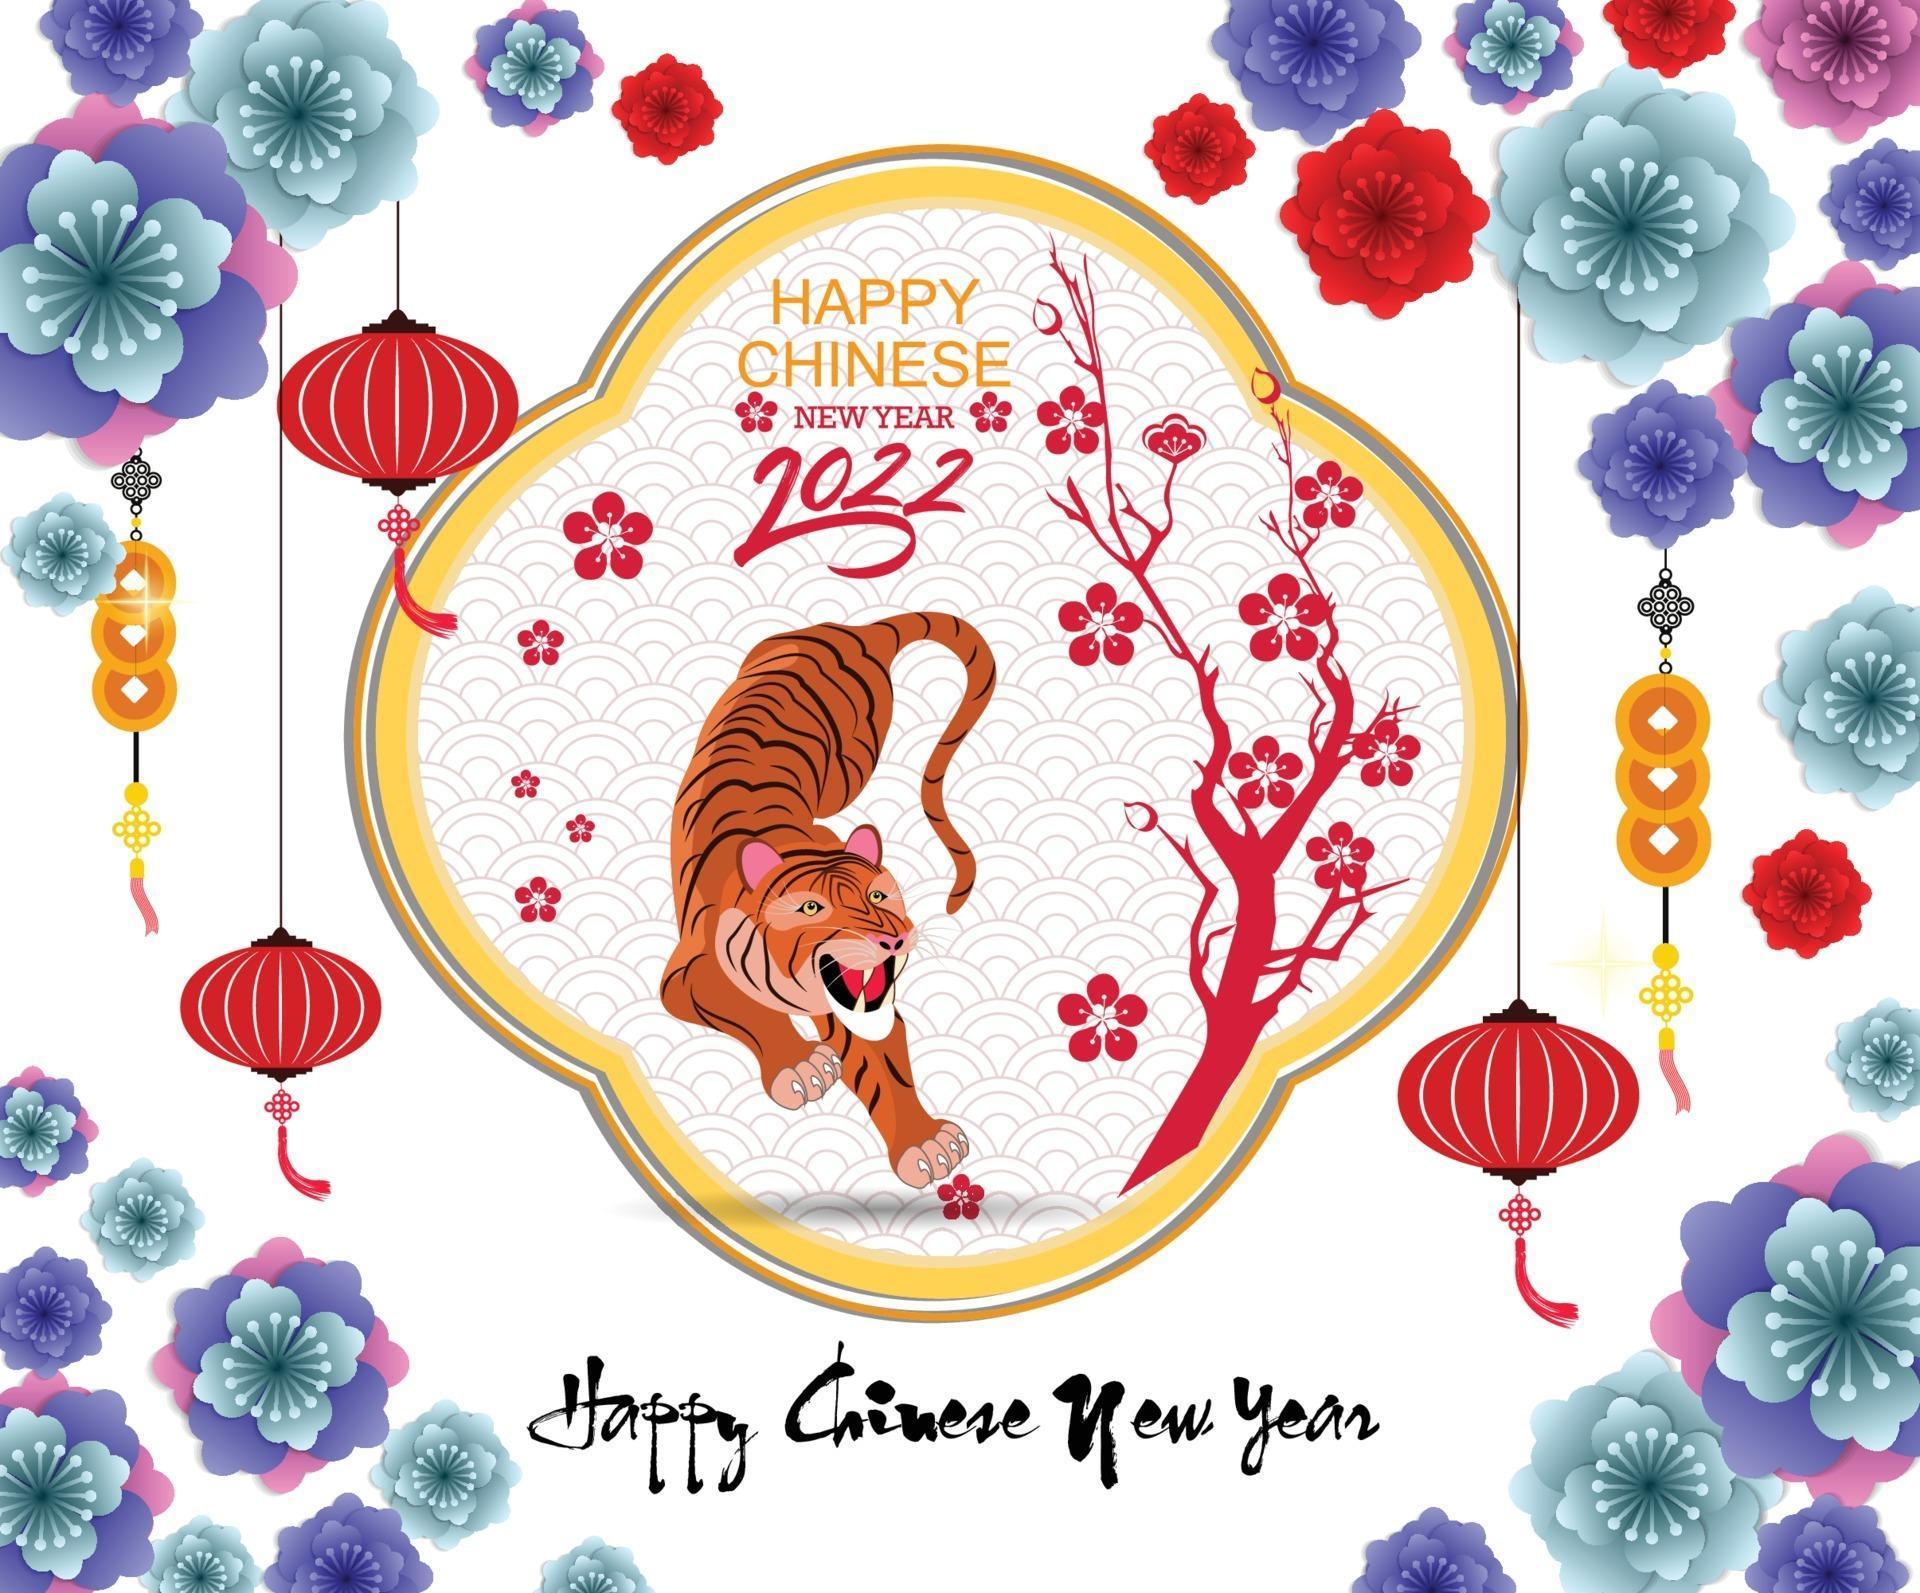 happy chinese new year 2022 year of the tiger lunar new year banner design template vector